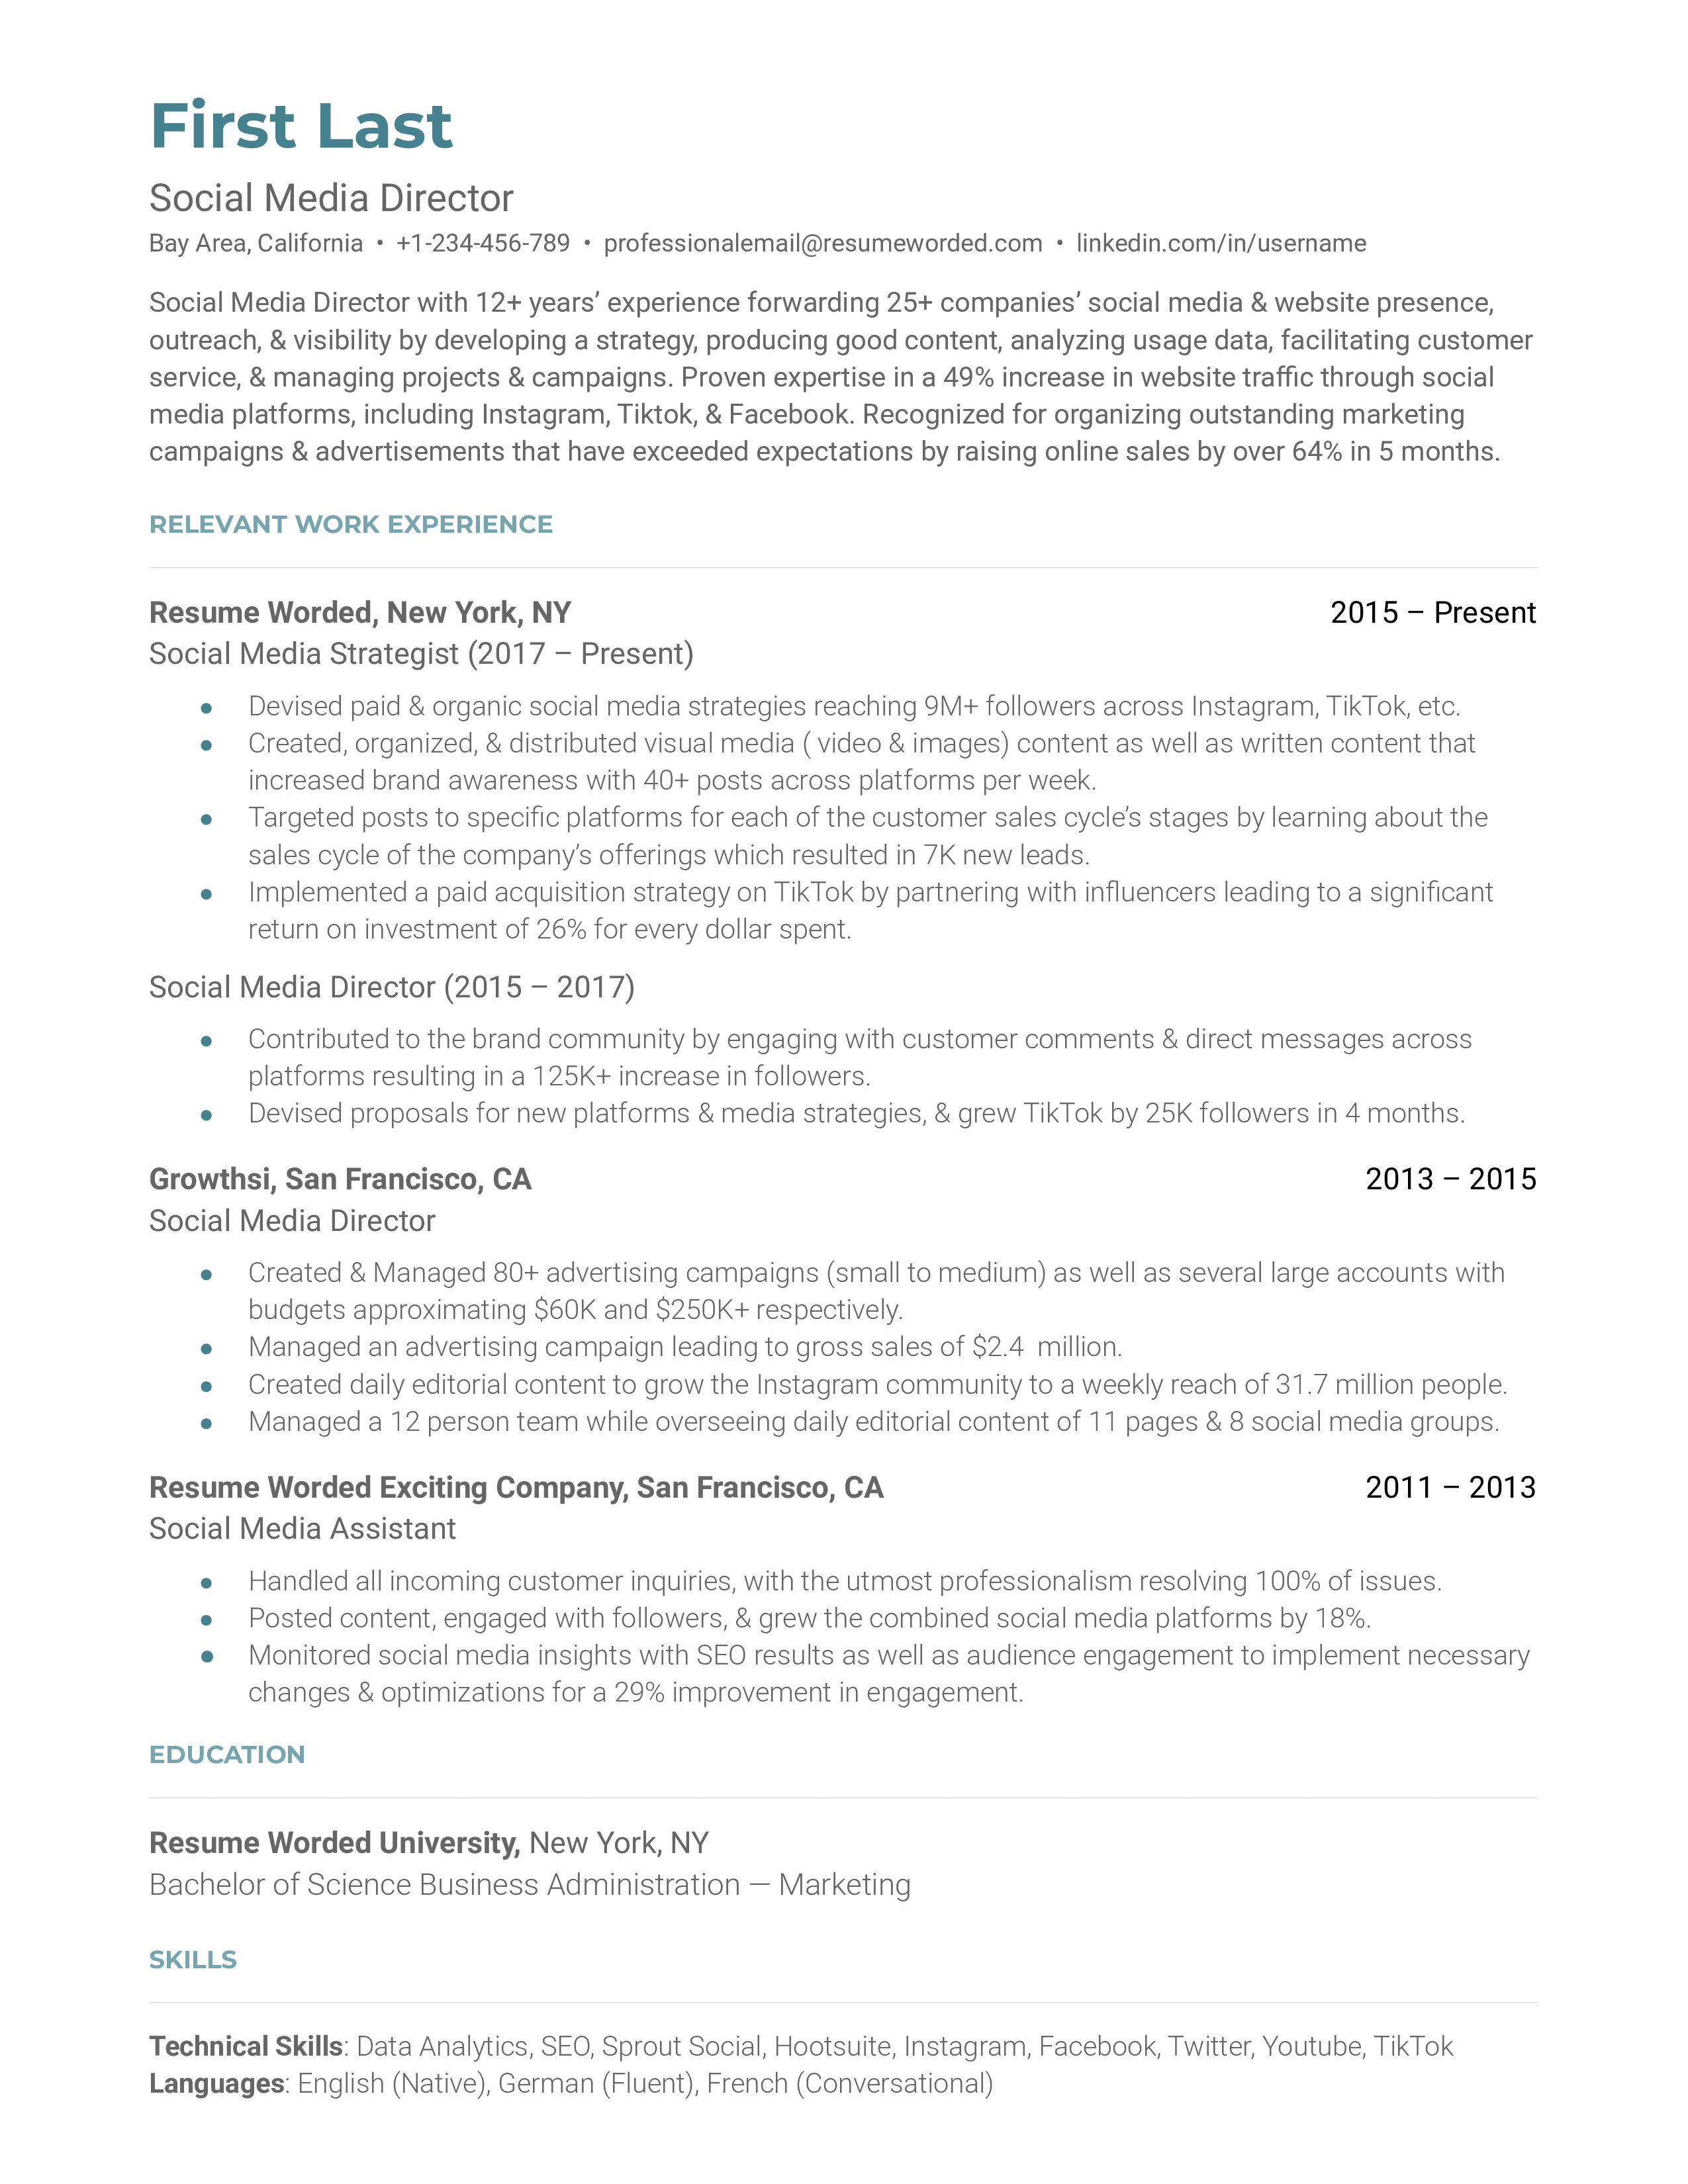 A resume for a social media director with a BS in marketing and experience as a social media assistant and strategist.